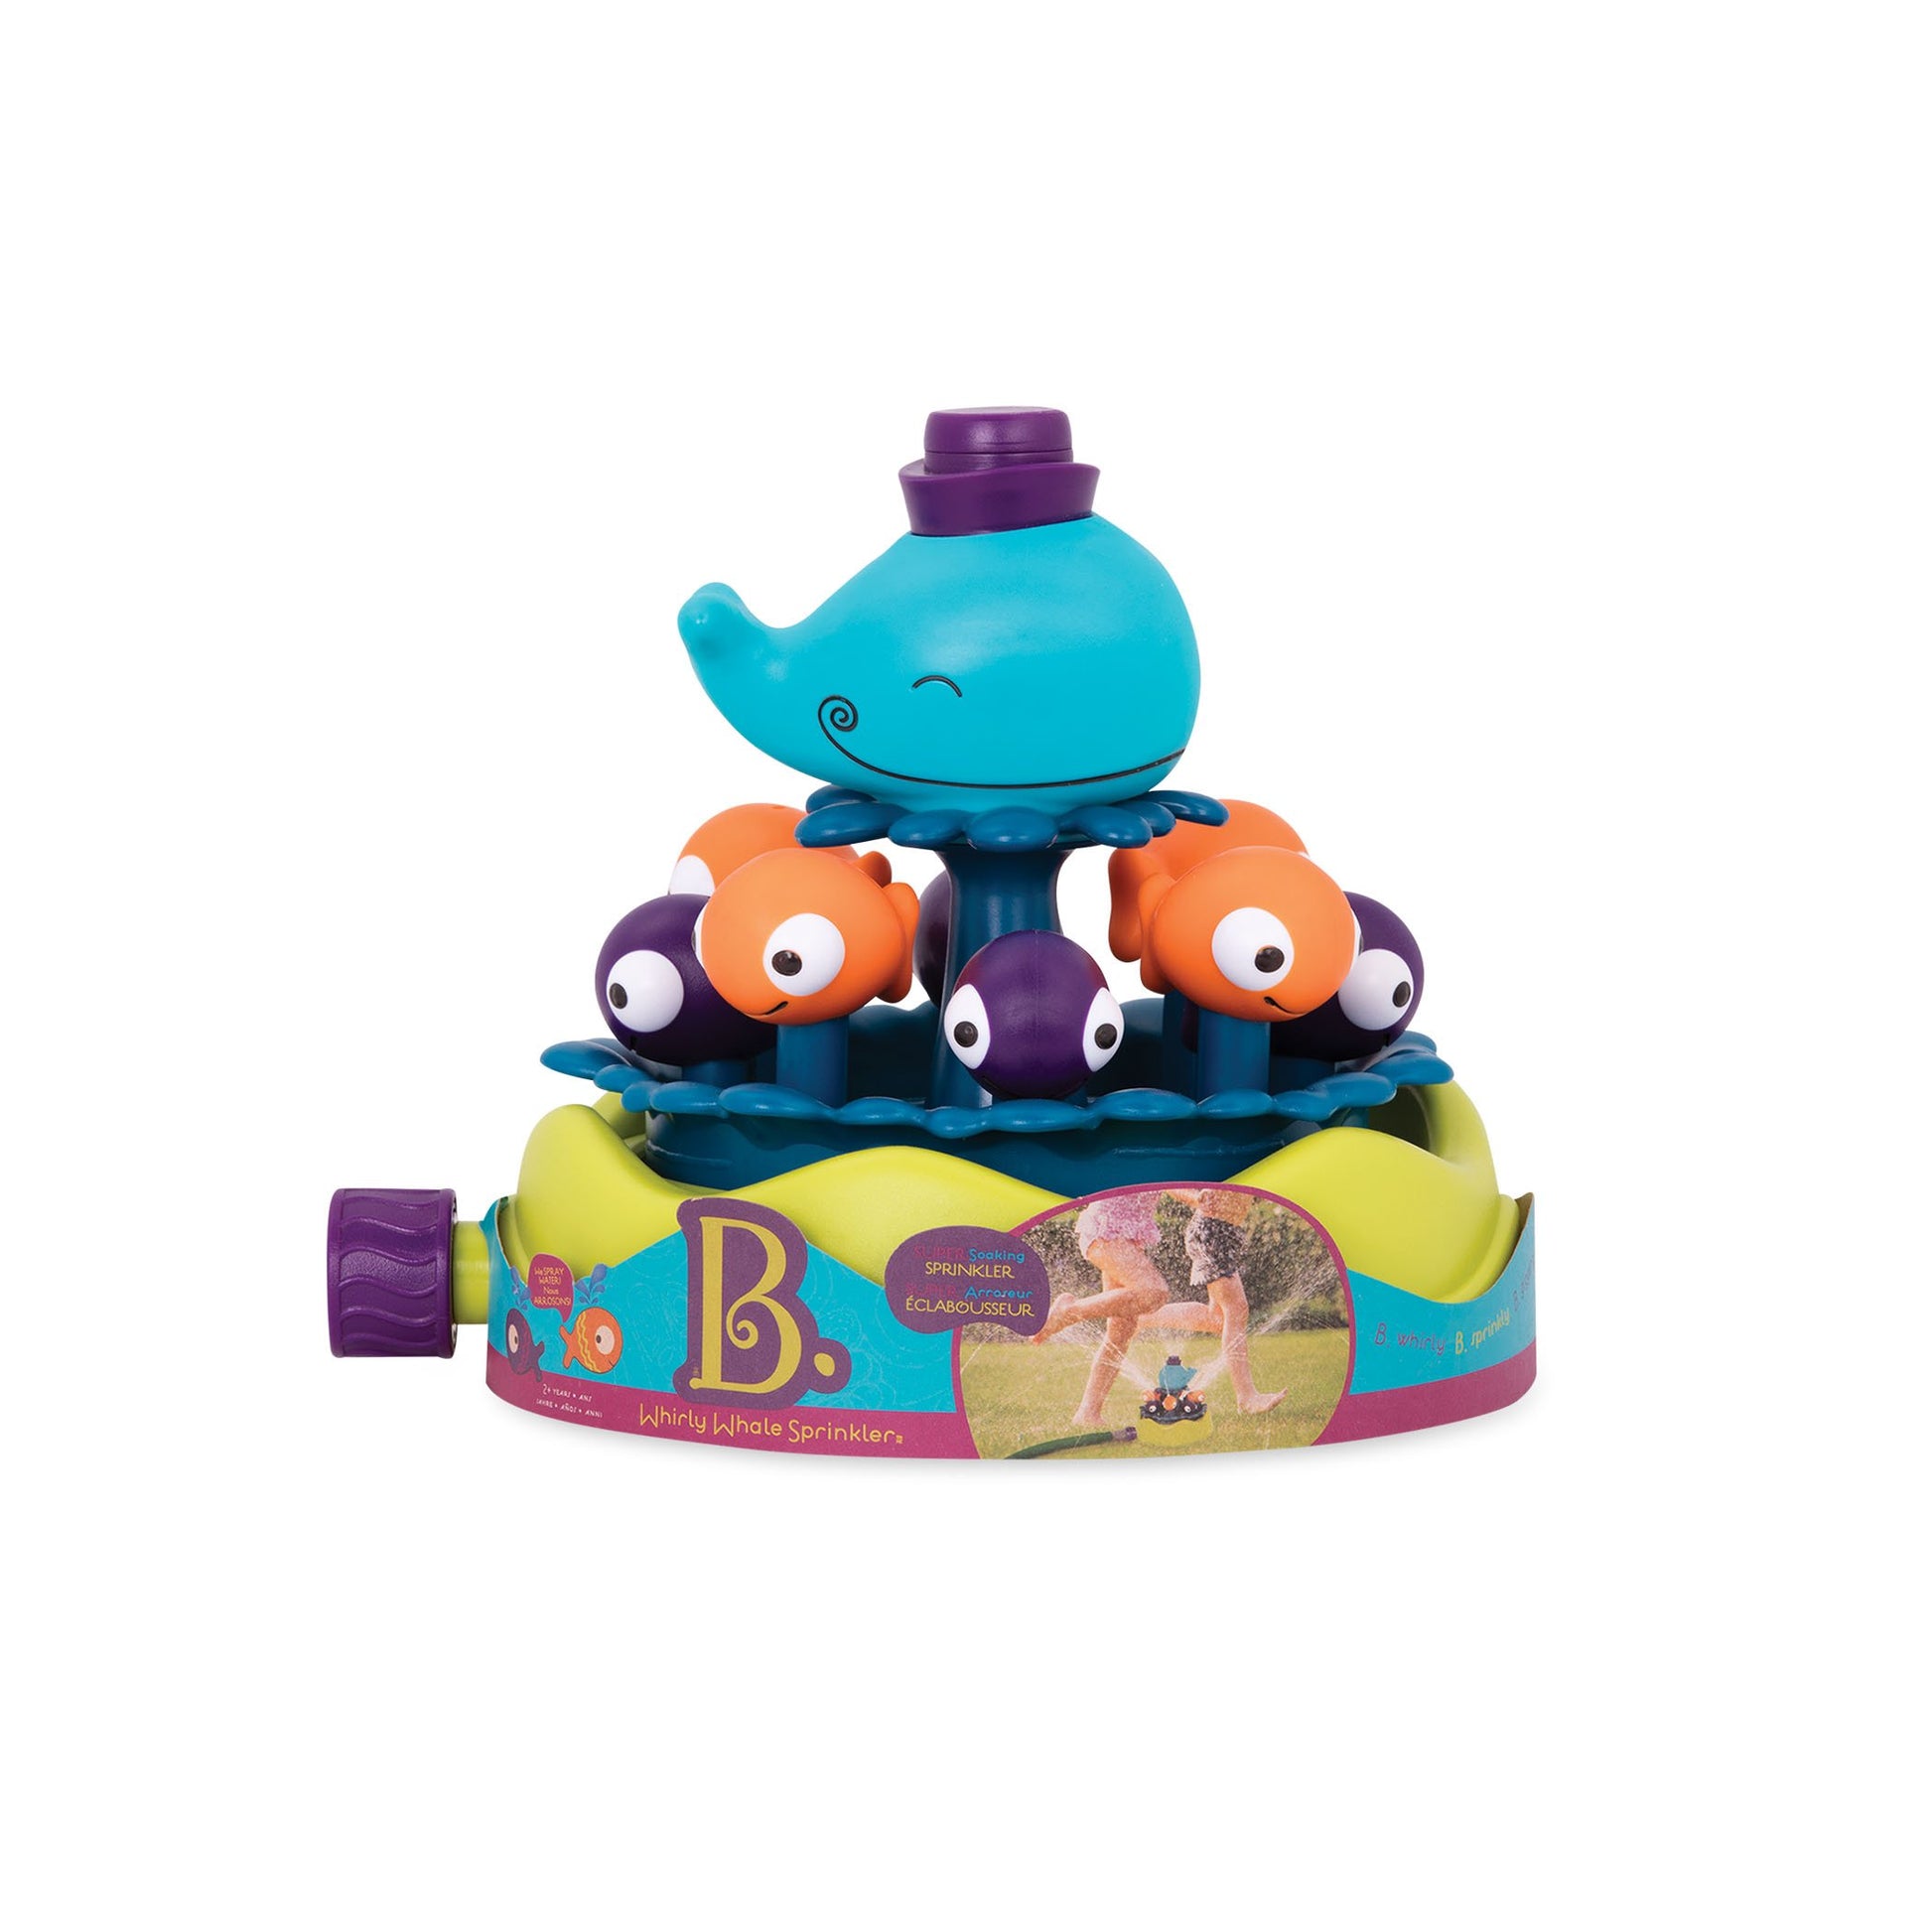 B. Whirly Whale Sprinkler The Toy Wagon